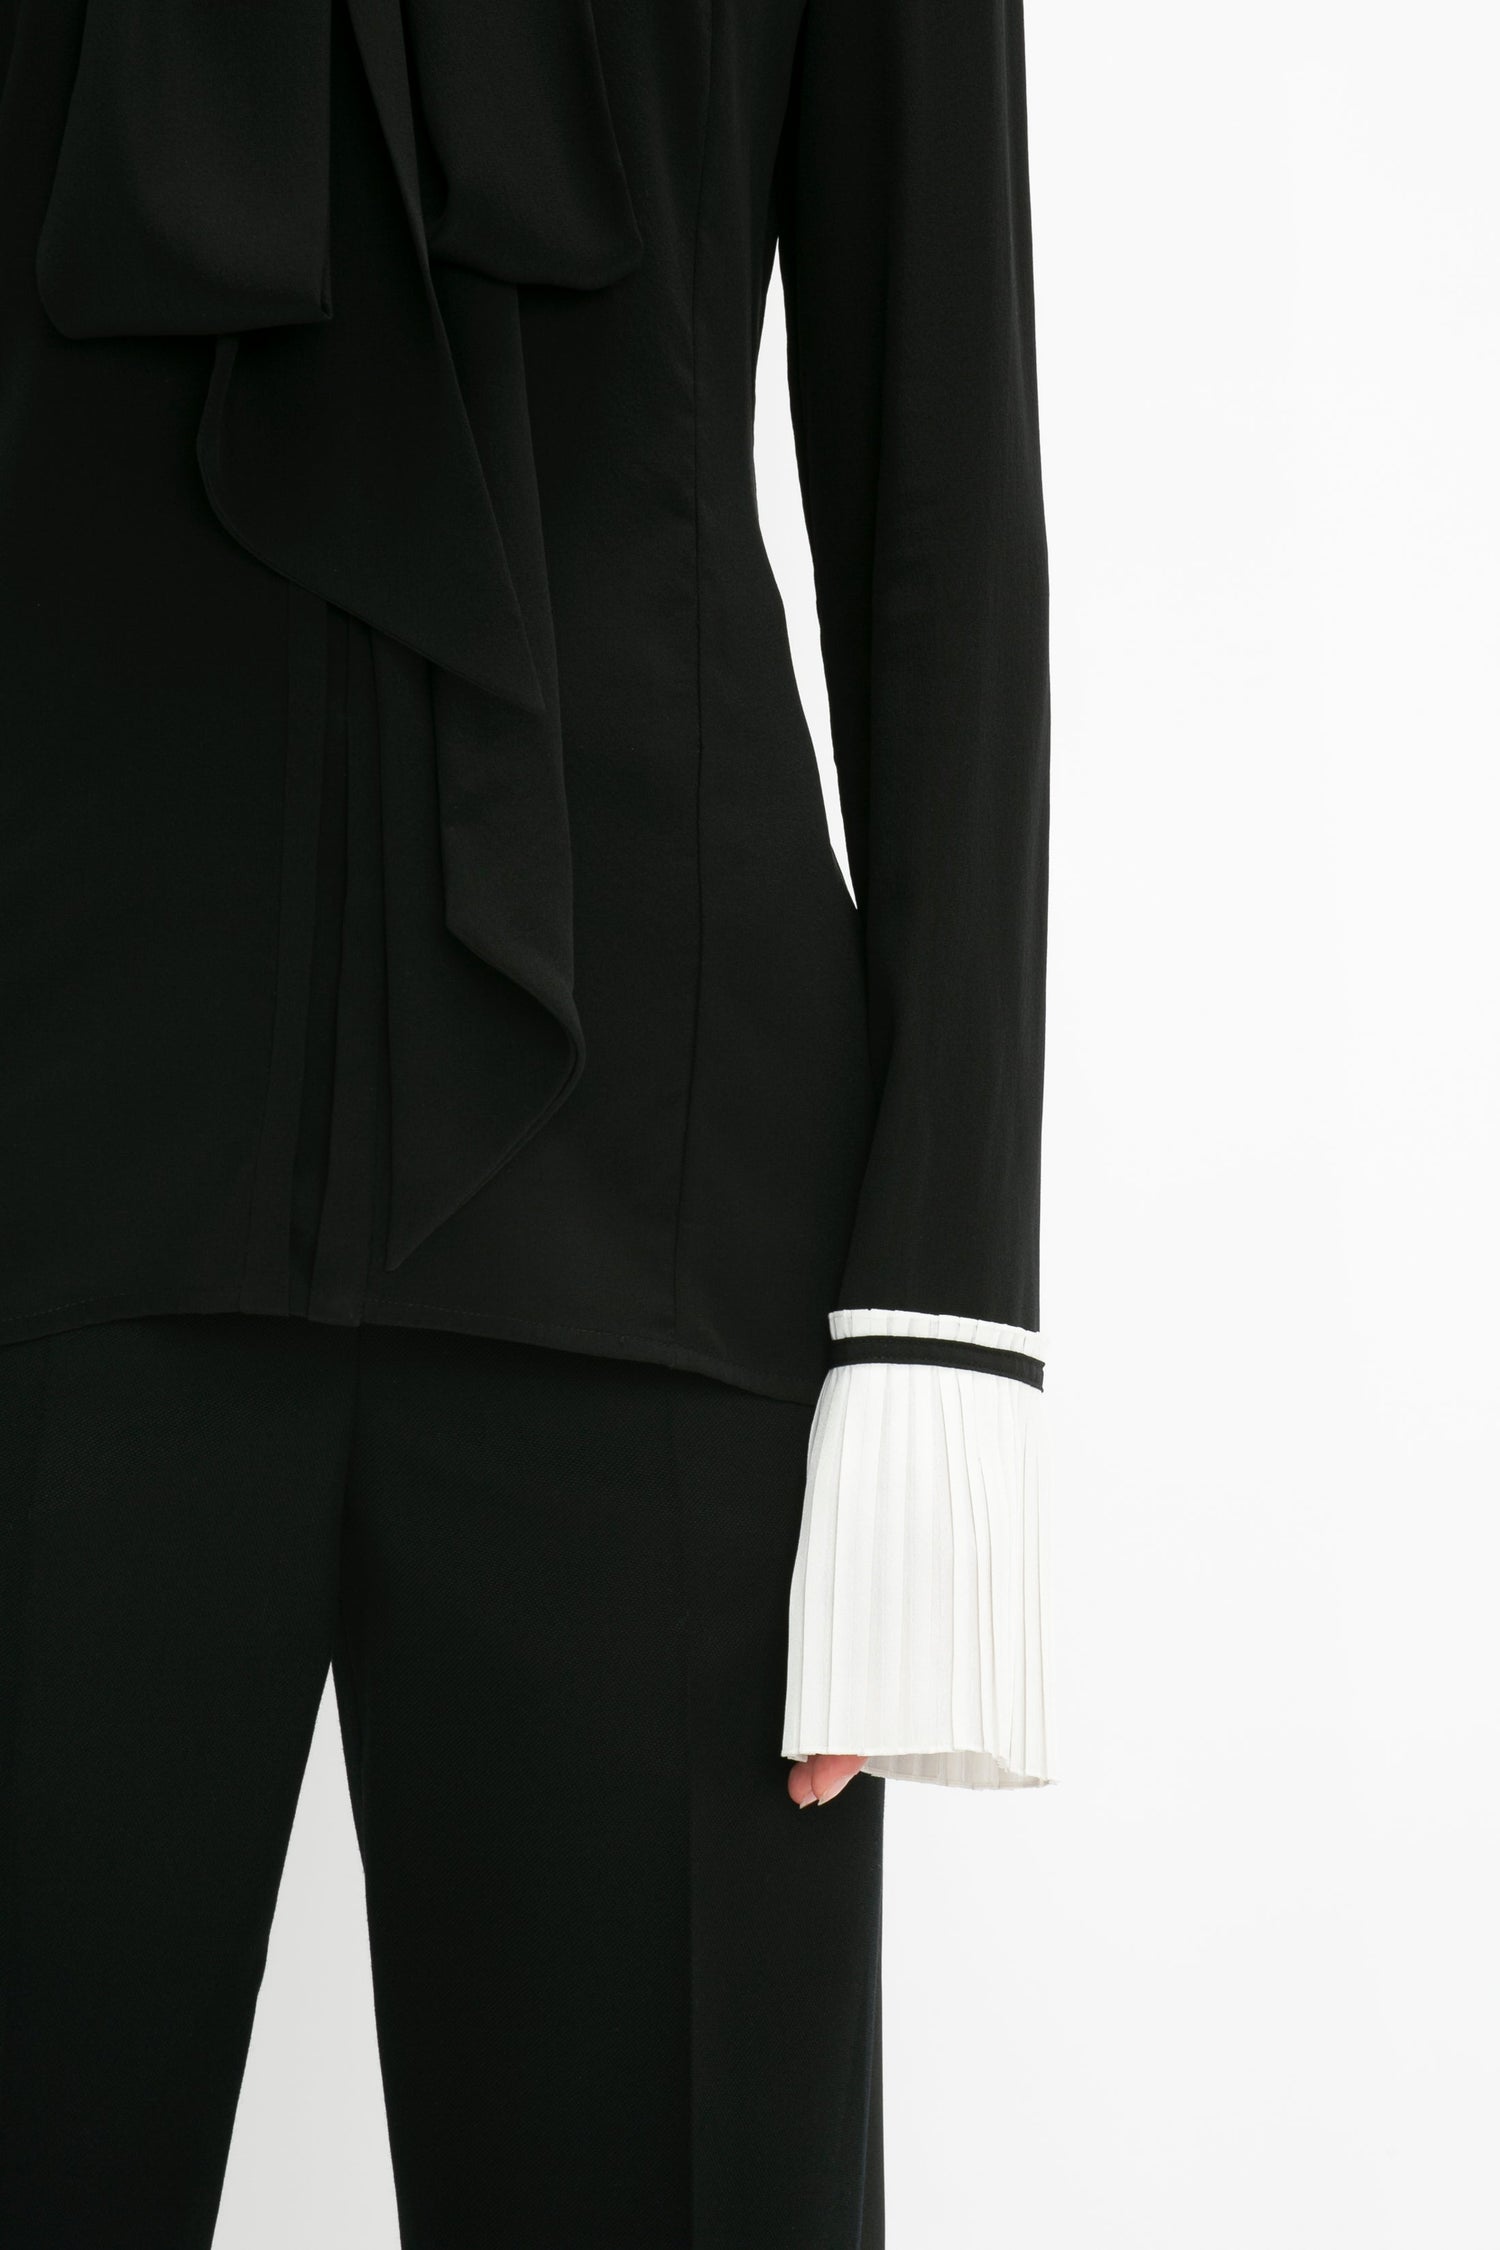 A person wearing the Pleat Cuff Blouse In Black by Victoria Beckham with knife pleat cuffs and a white pleated cuff detail on the sleeve.